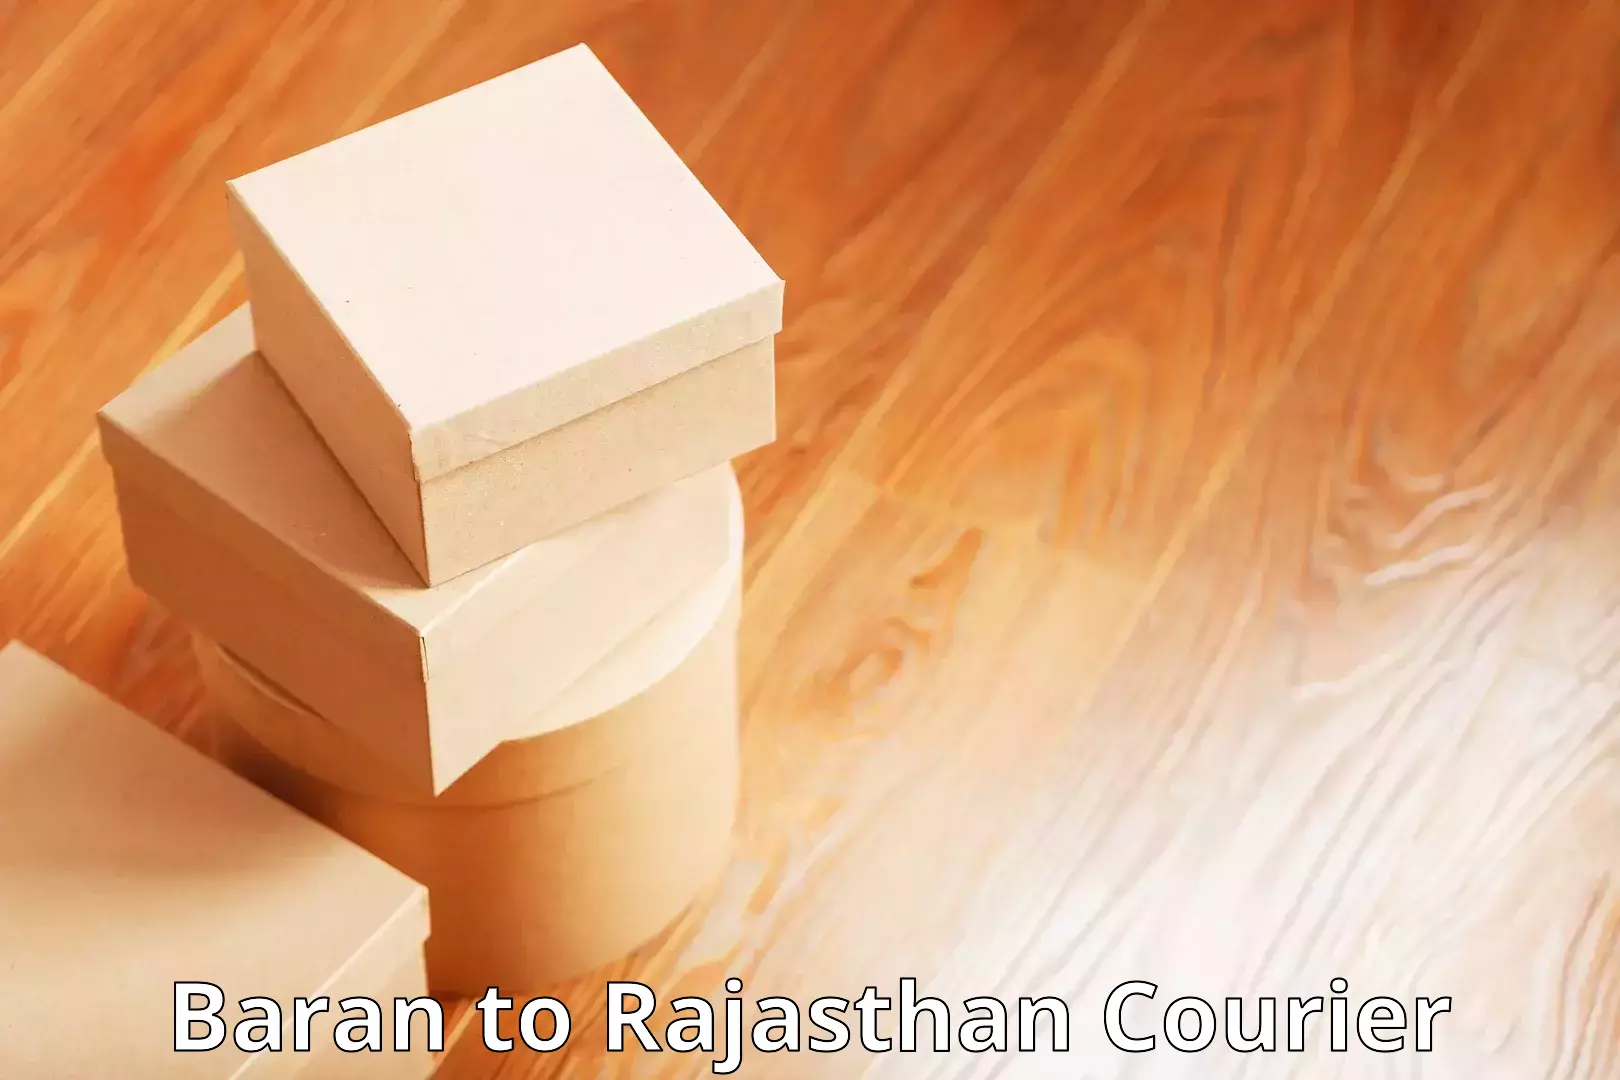 State-of-the-art courier technology in Baran to Anupgarh